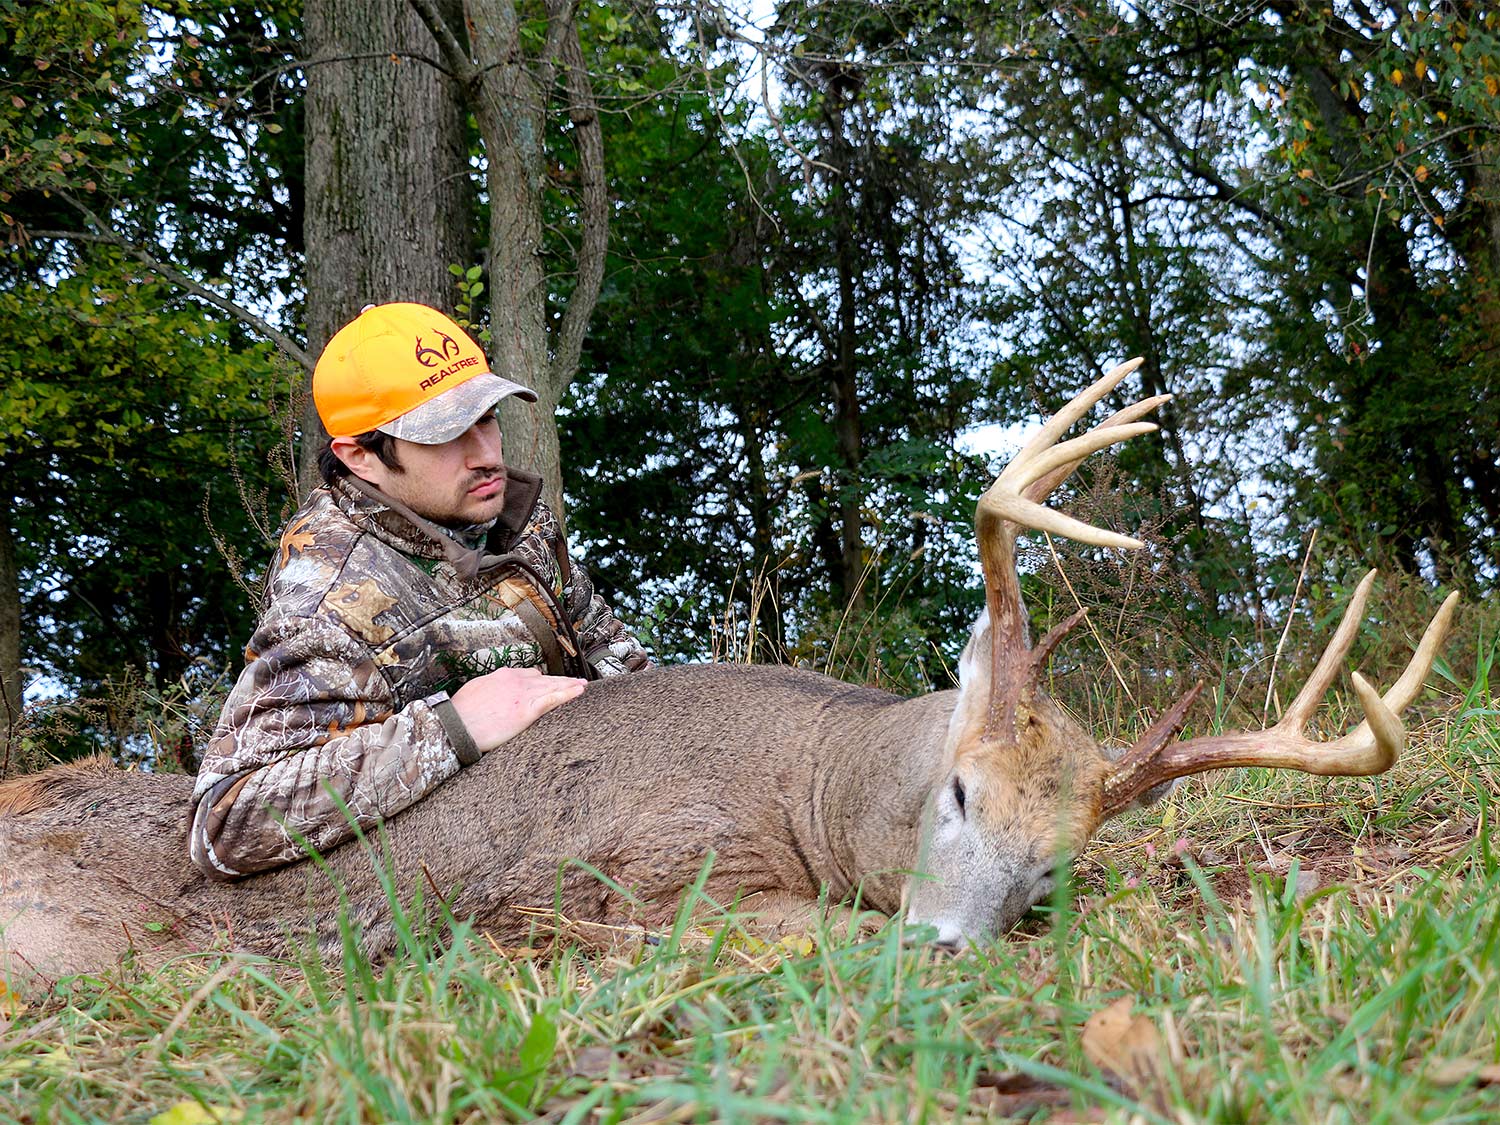 A hunter poses next to a whitetail deer on the ground.